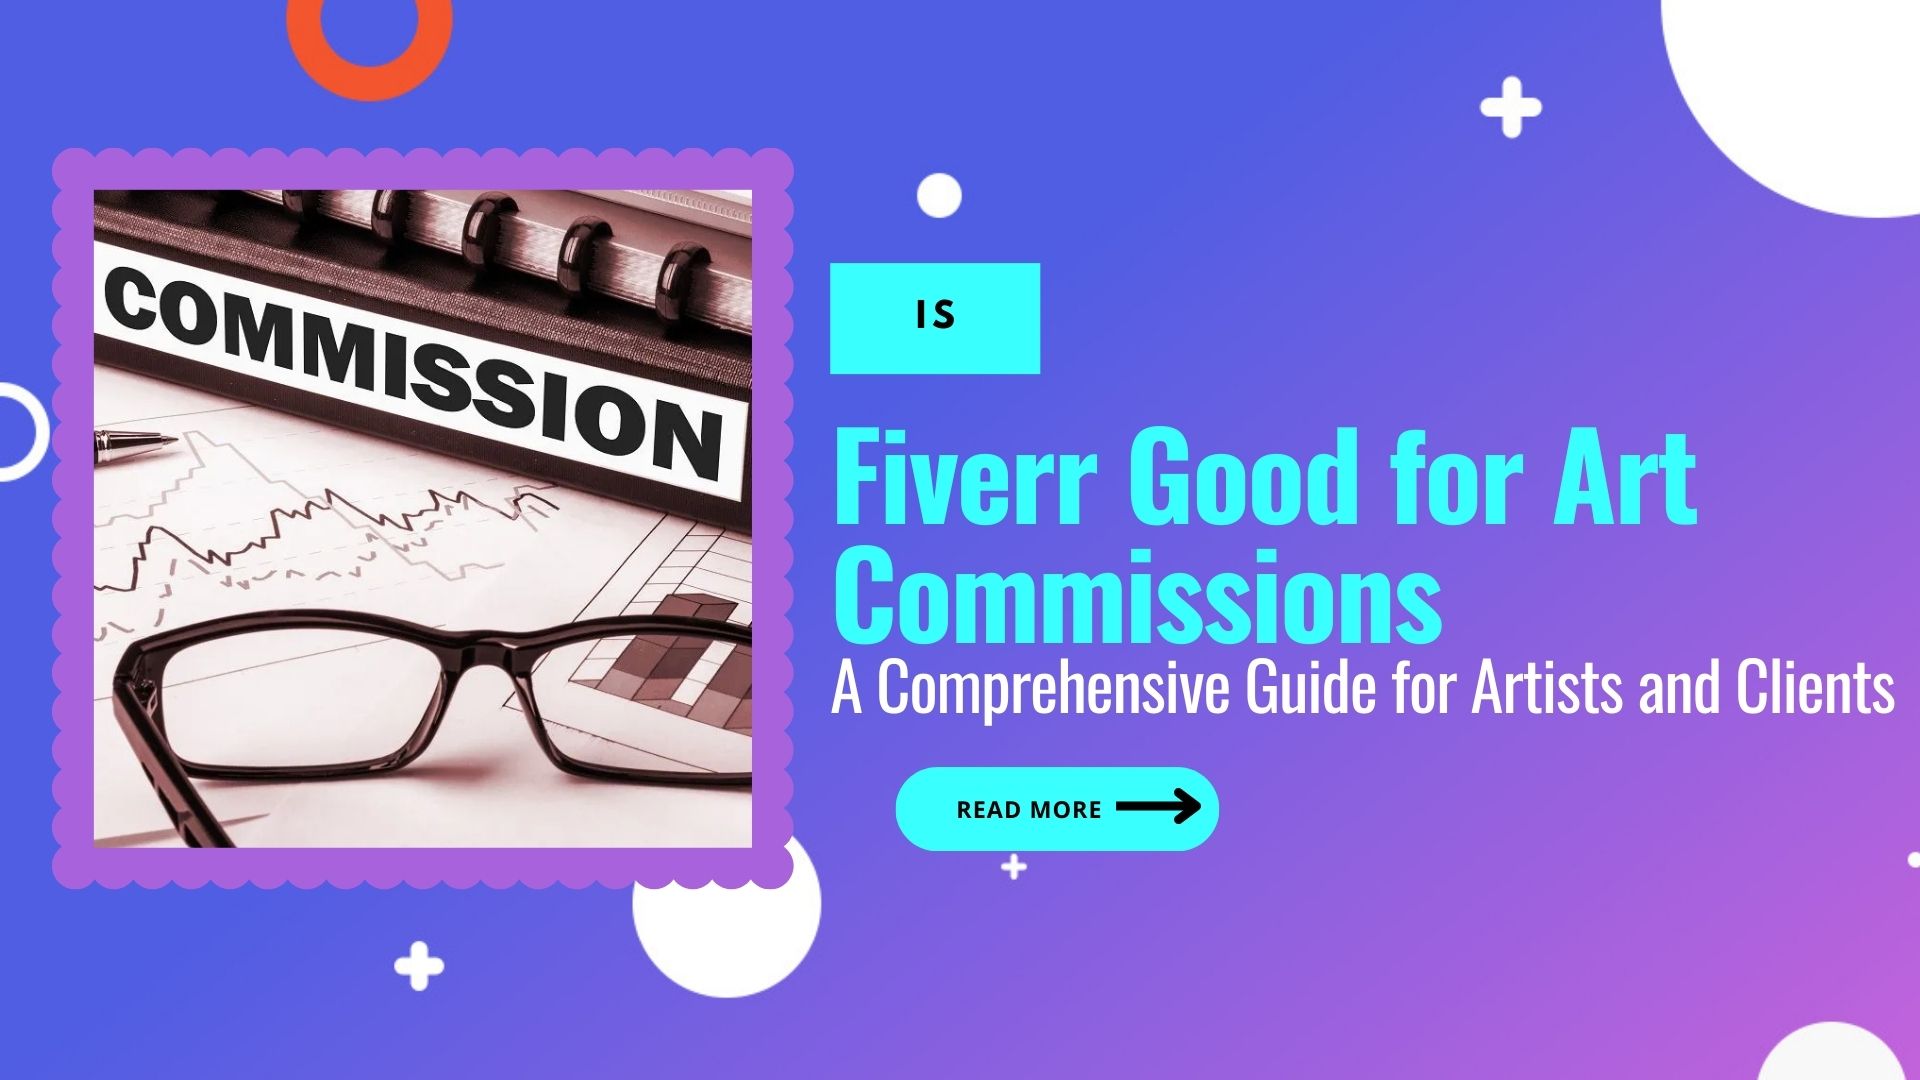 Is Fiverr Good for Art Commissions? A Comprehensive Guide for Artists and Clients